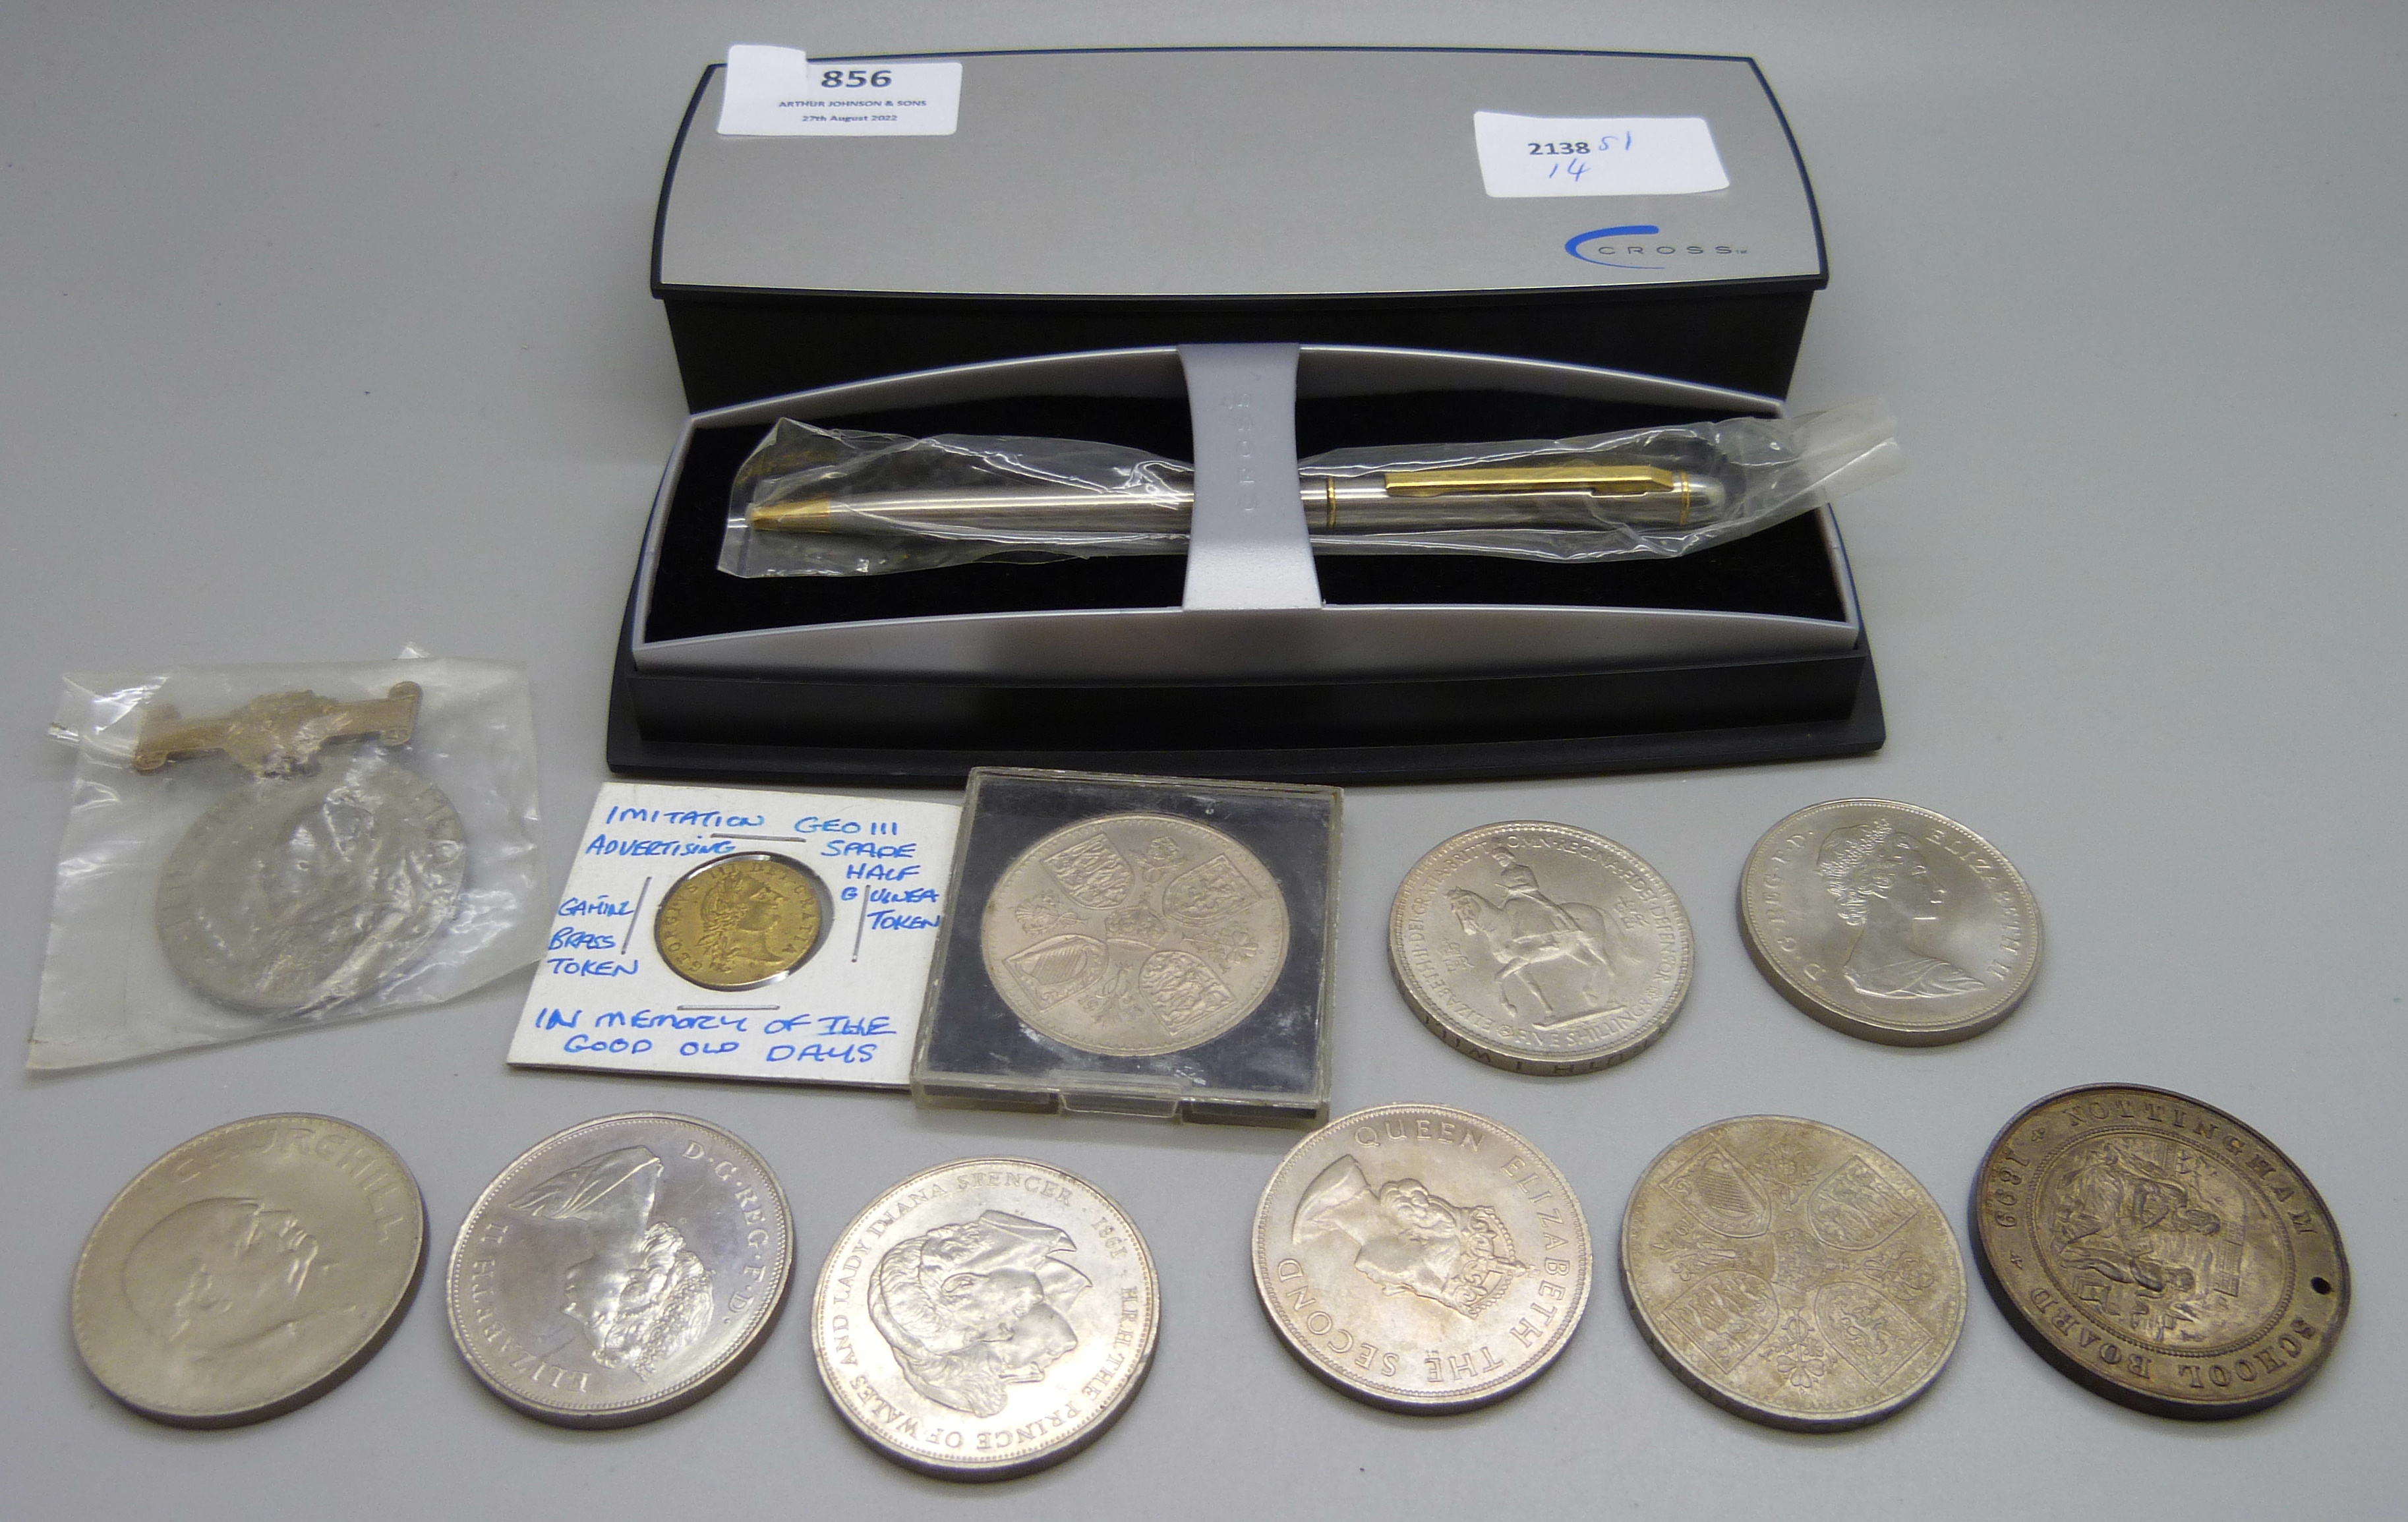 A collection of commemorative coins and a Cross pen